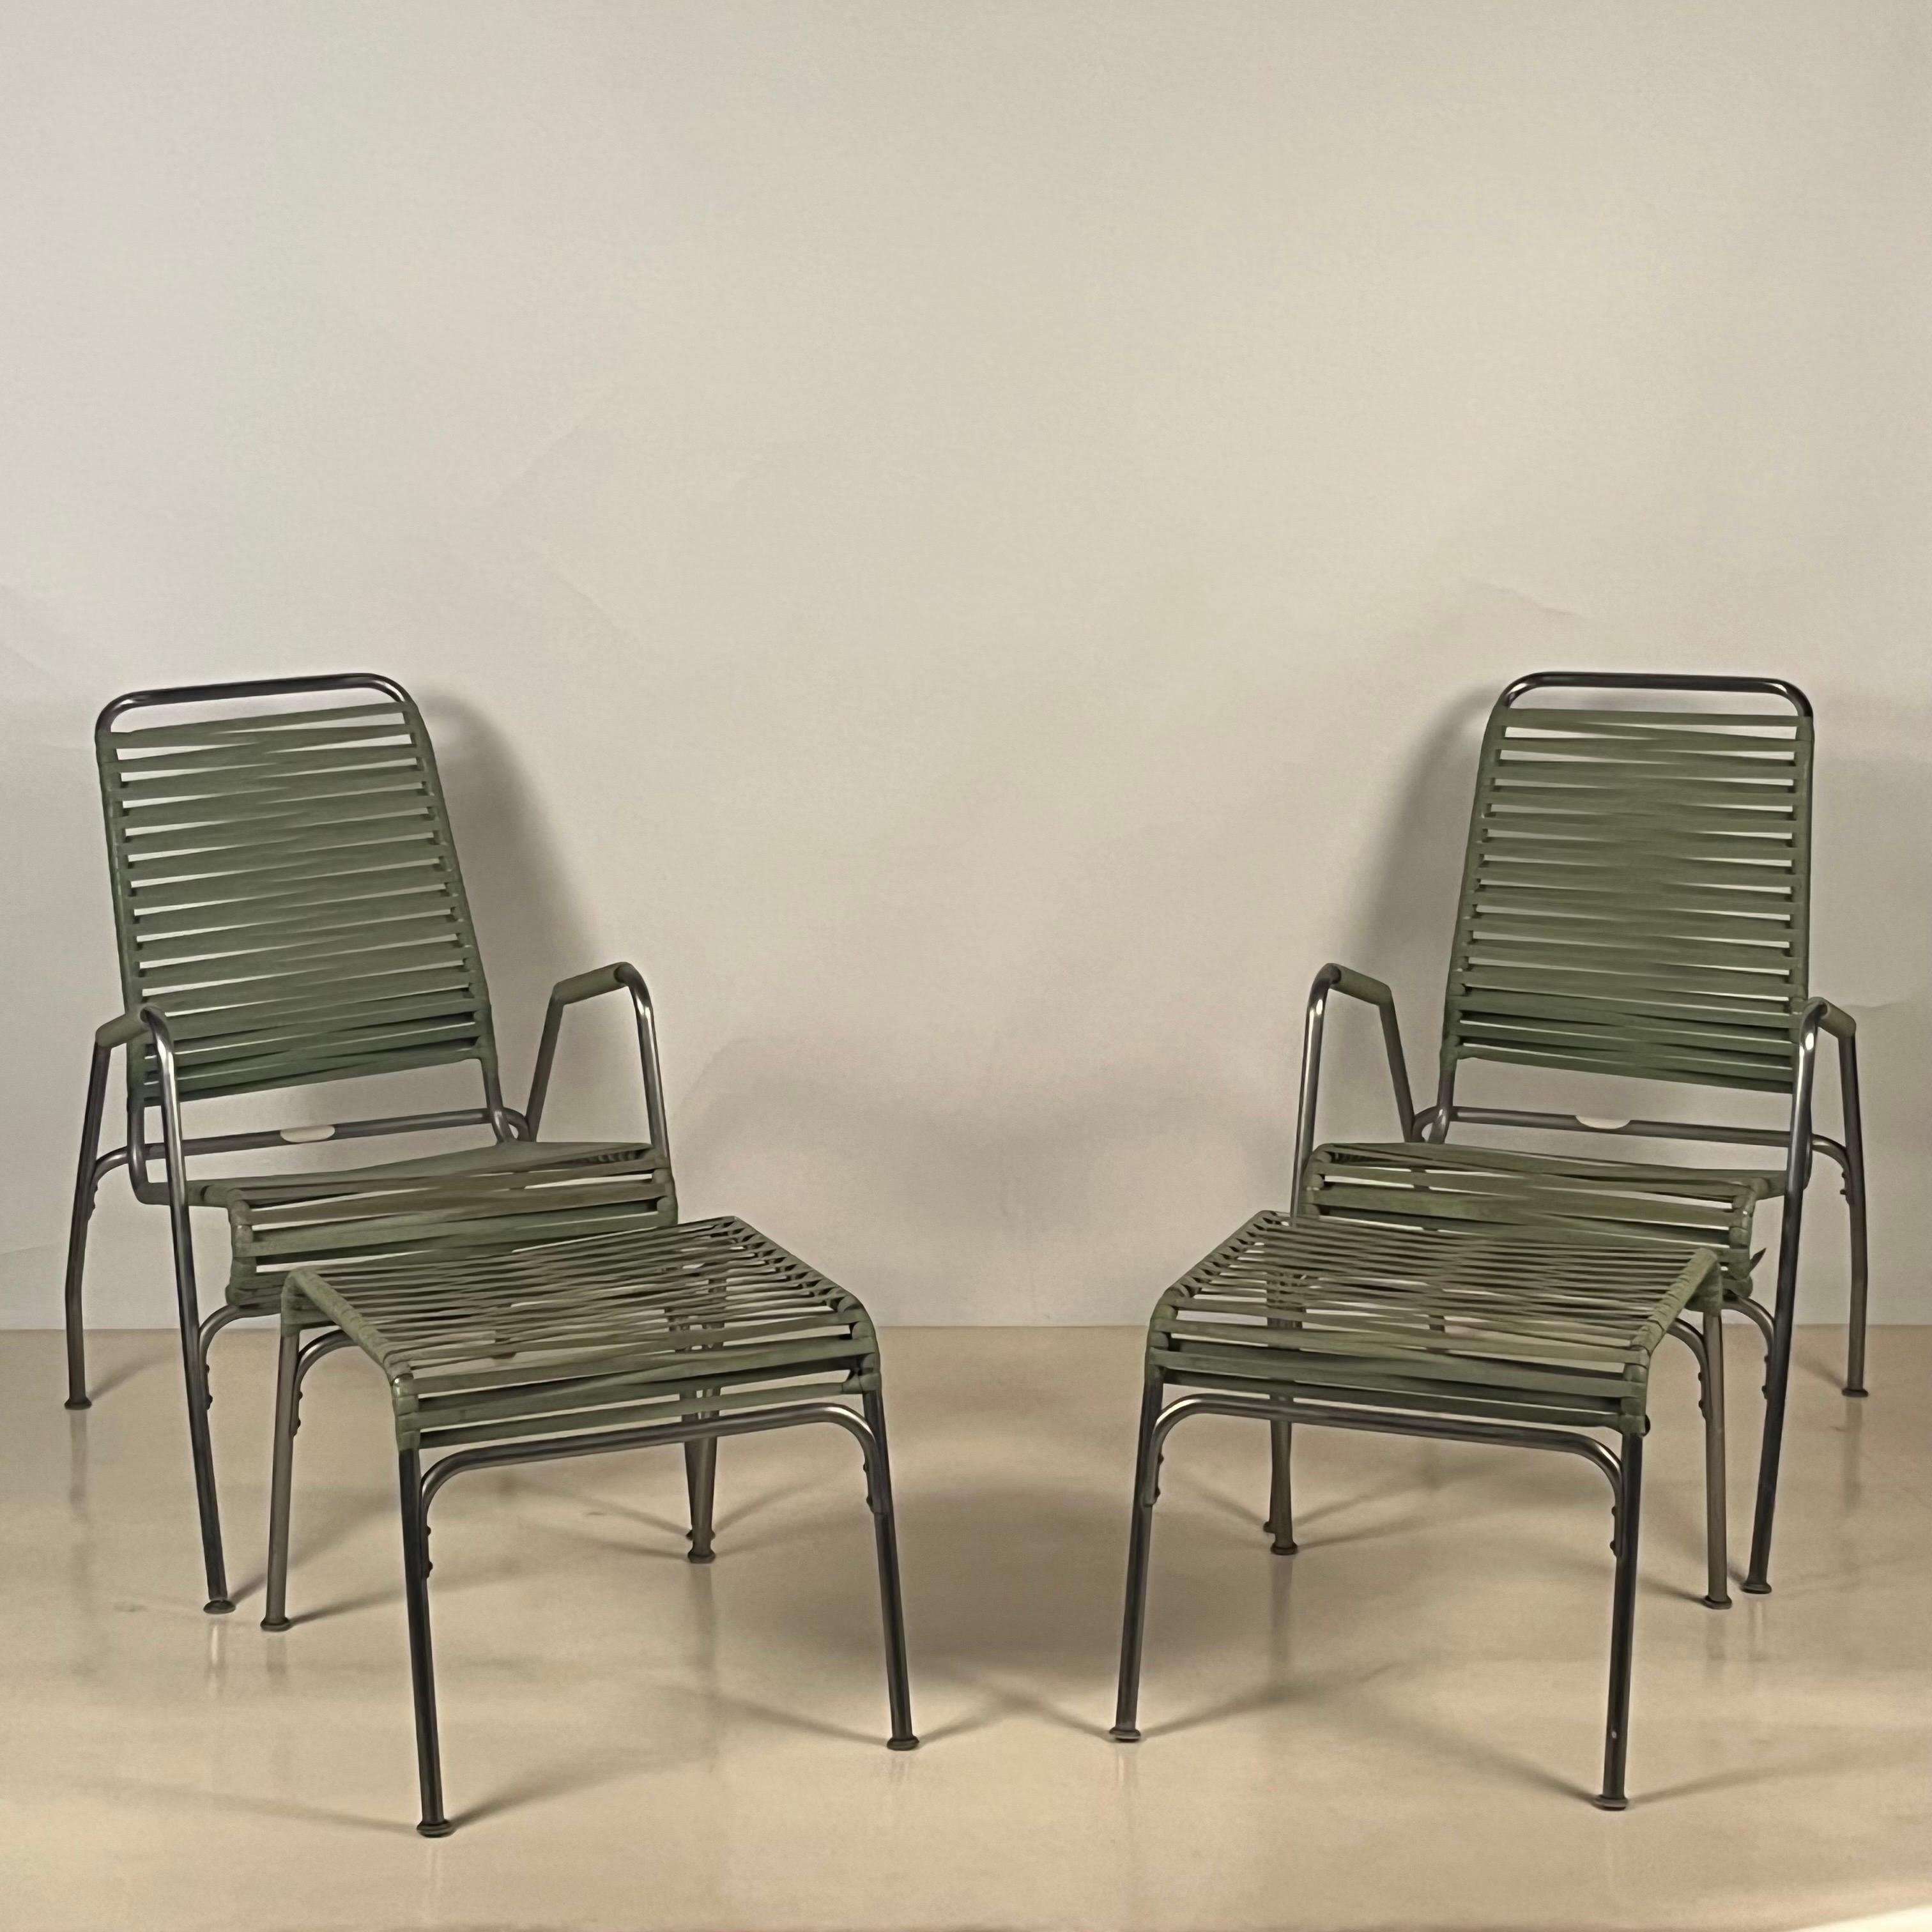 Rare set of American Mid-Century Modern stainless steel patio furniture.

Lounge chairs: 22 1/2 wide x 31 1/2 deep x 34 1/2 tall & 17 in. seat height
Foot rests: 19 wide x 23 deep x 16 1/2 in. tall
Table: 22 wide x 16 deep x 22 in. tall

Sold as a